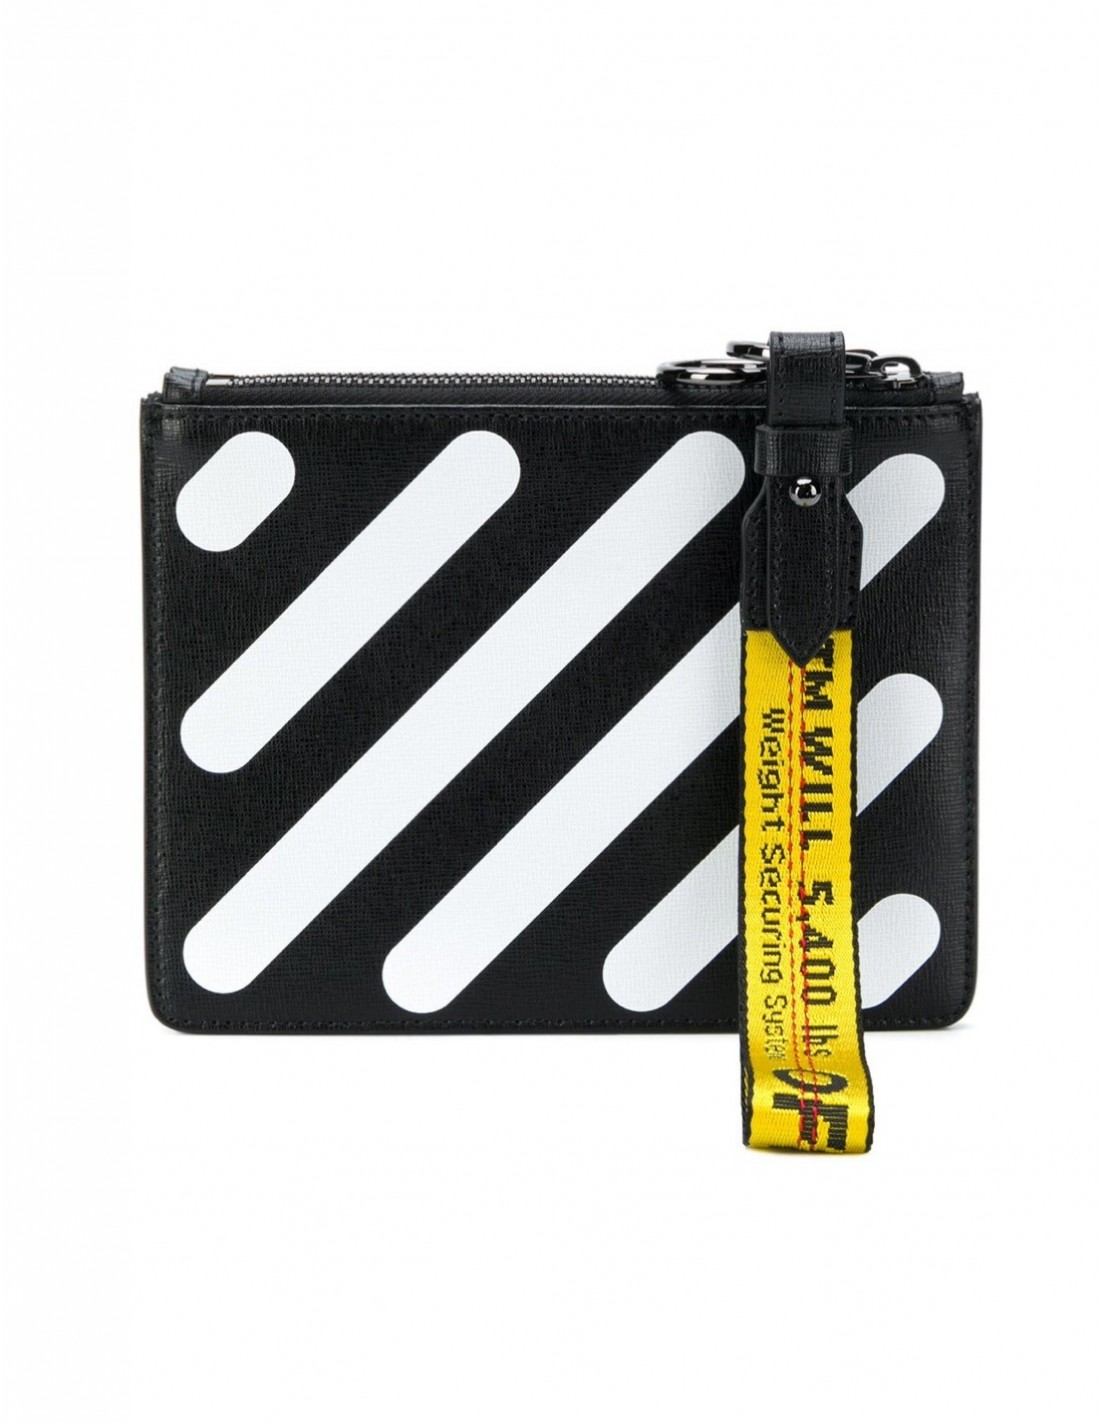 OFF-WHITE c/o Virgil Abloh diad double flat pouch in black and white